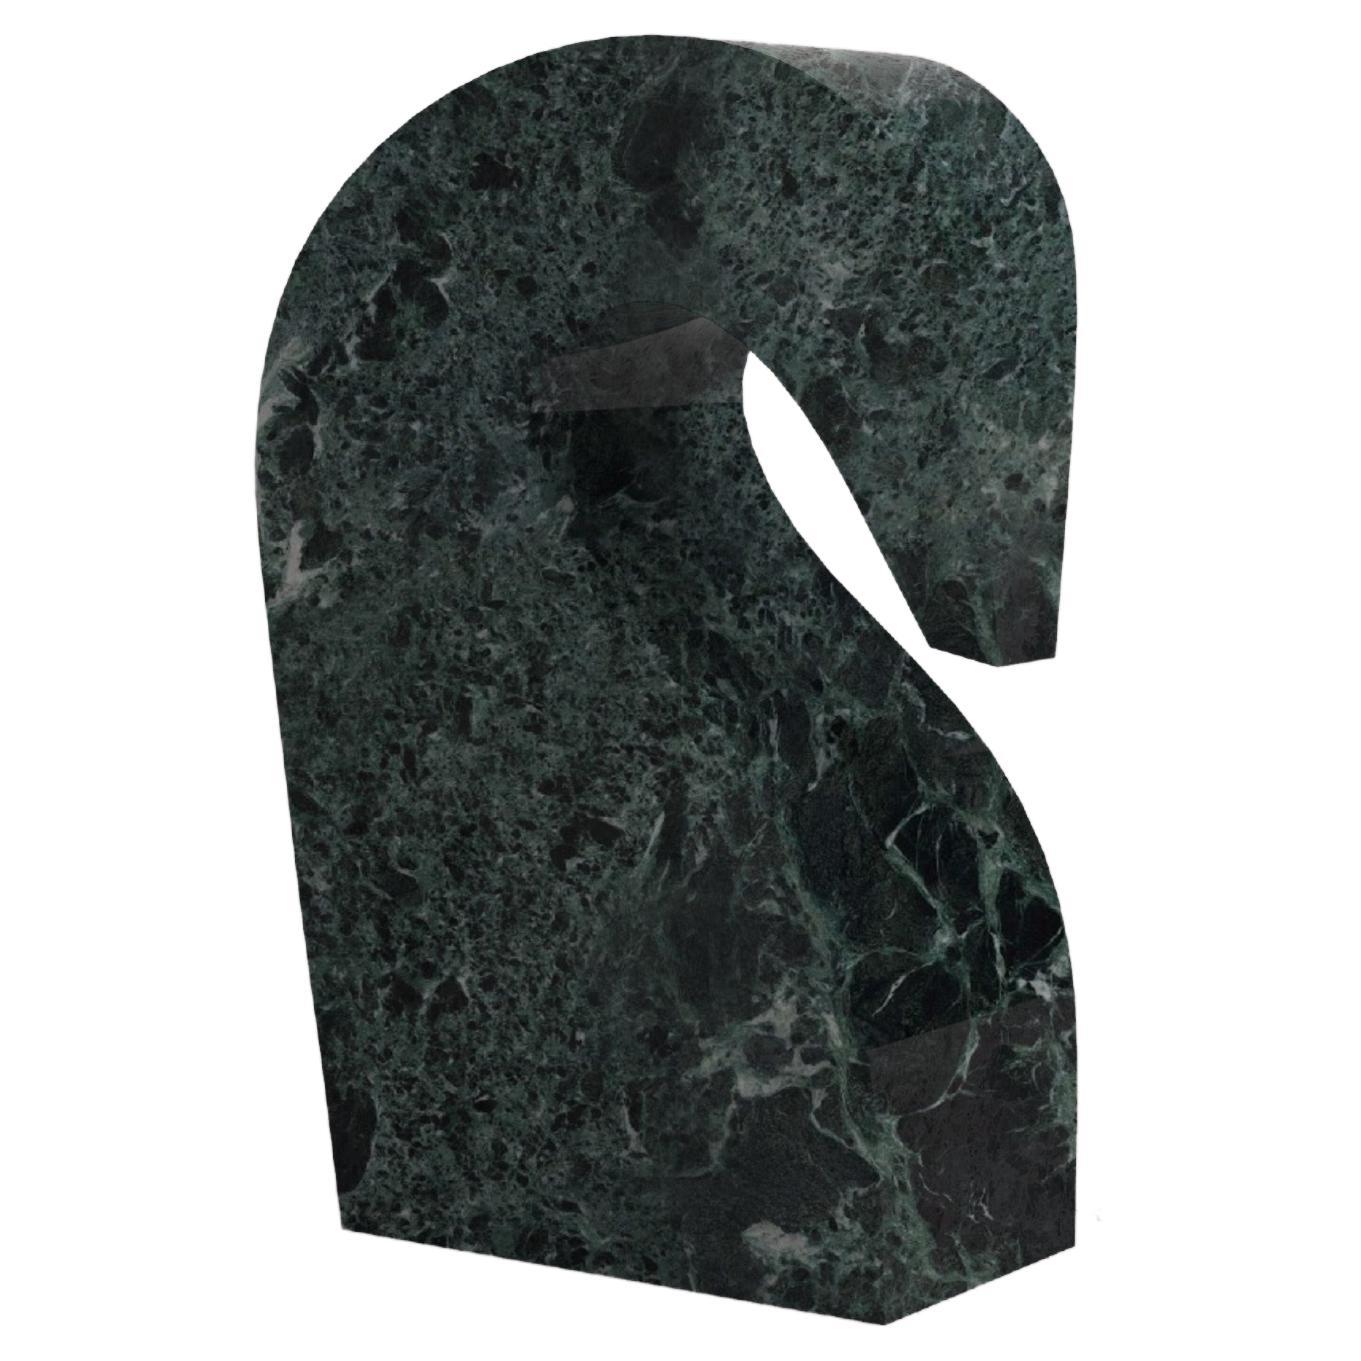 Horse sculpture in Verde Alpi marble by Carcino Design For Sale